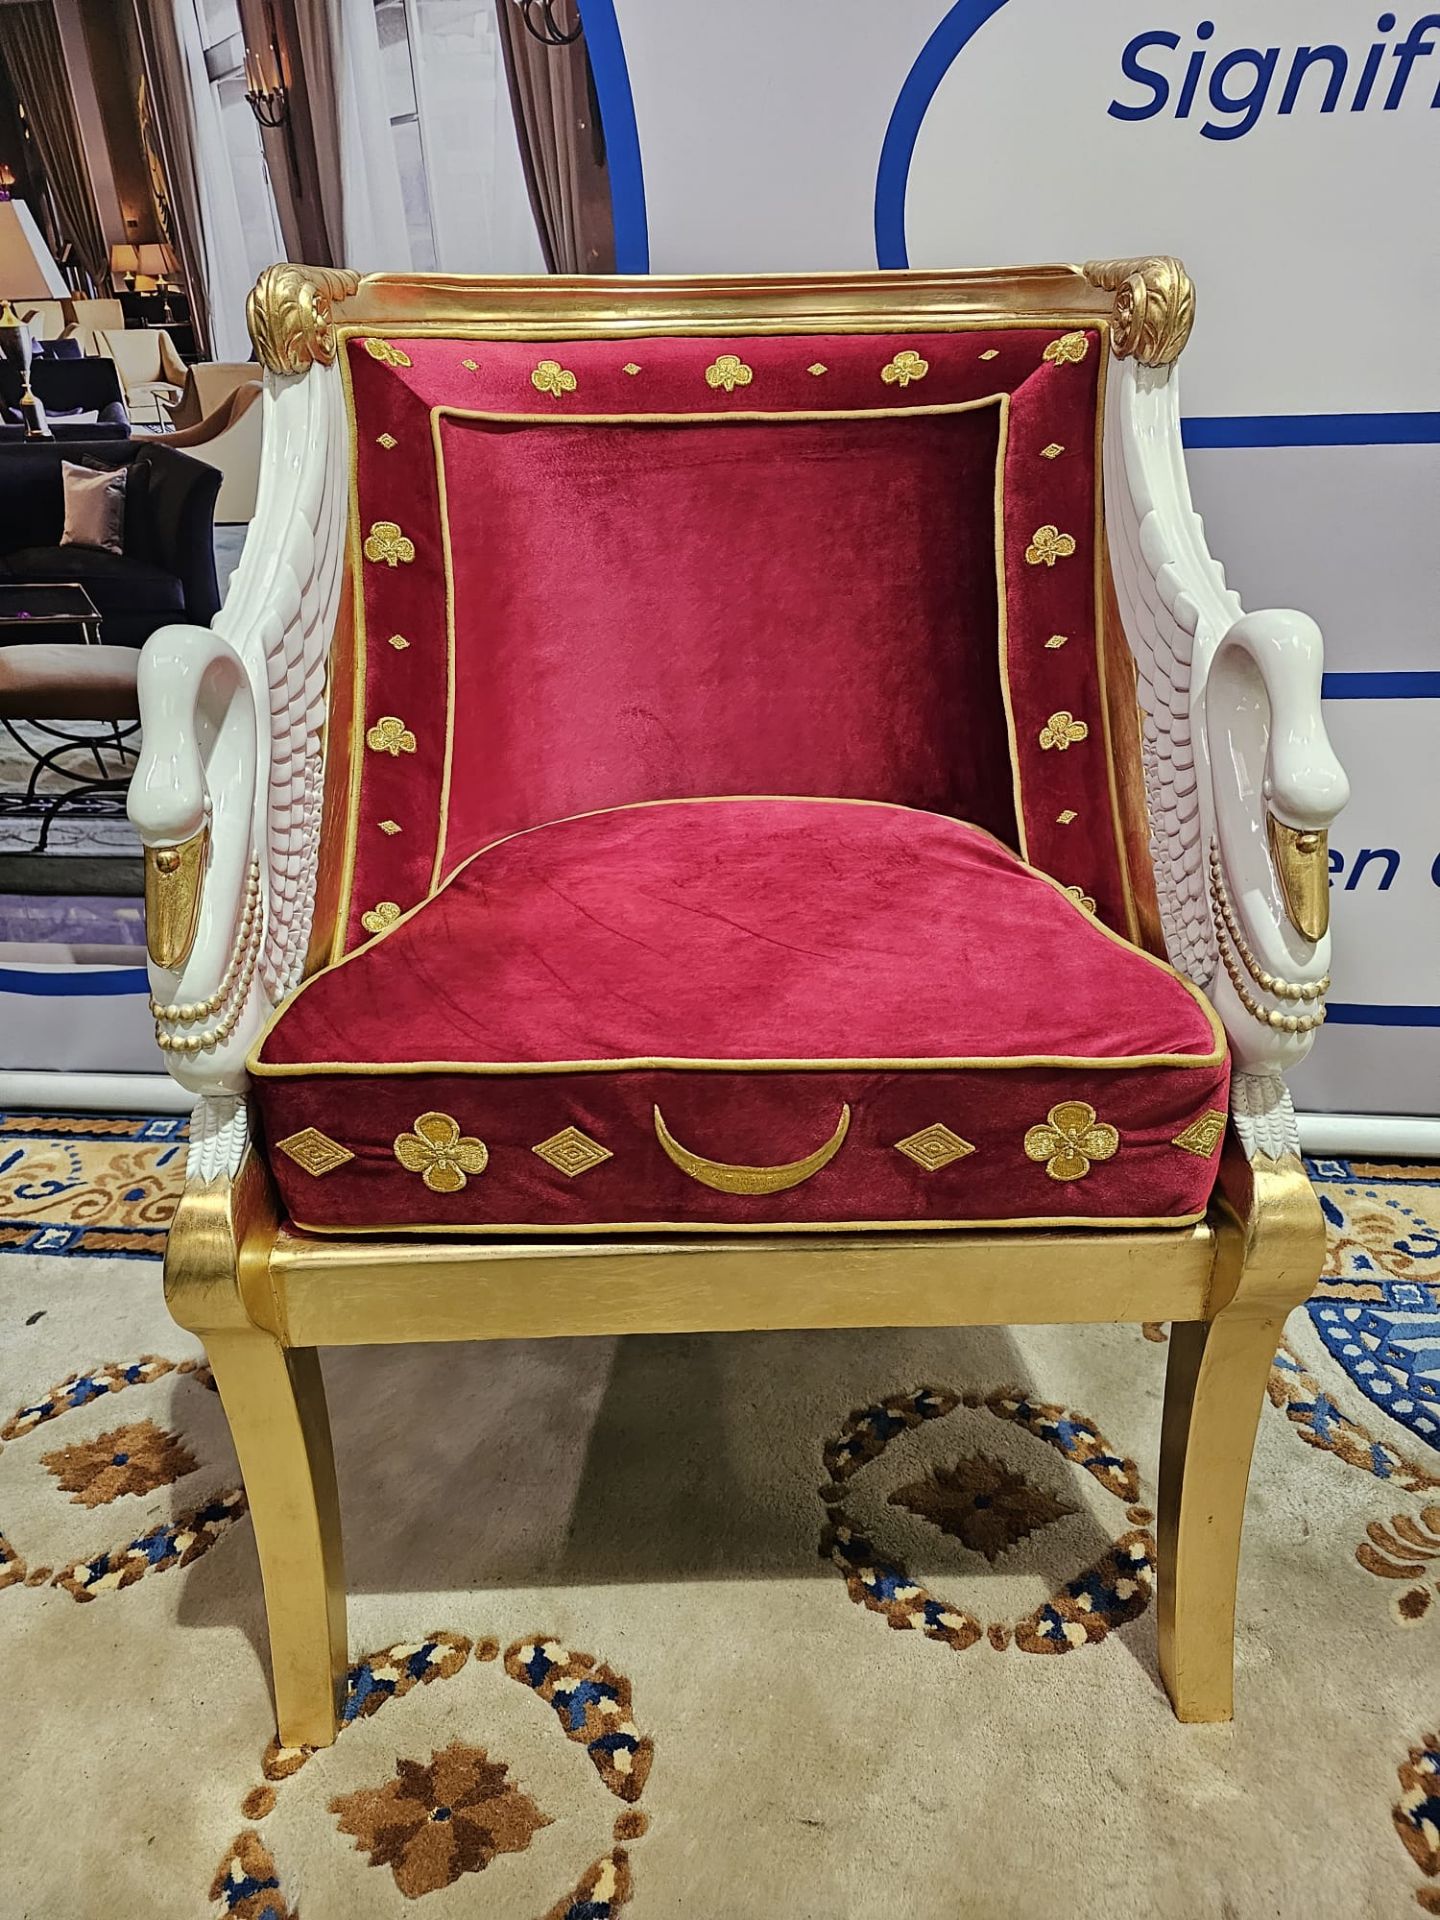 French Empire Style Fauteuil Inspired By The Early 19th Century Designs Of Jacob-Desmalter The - Image 4 of 11